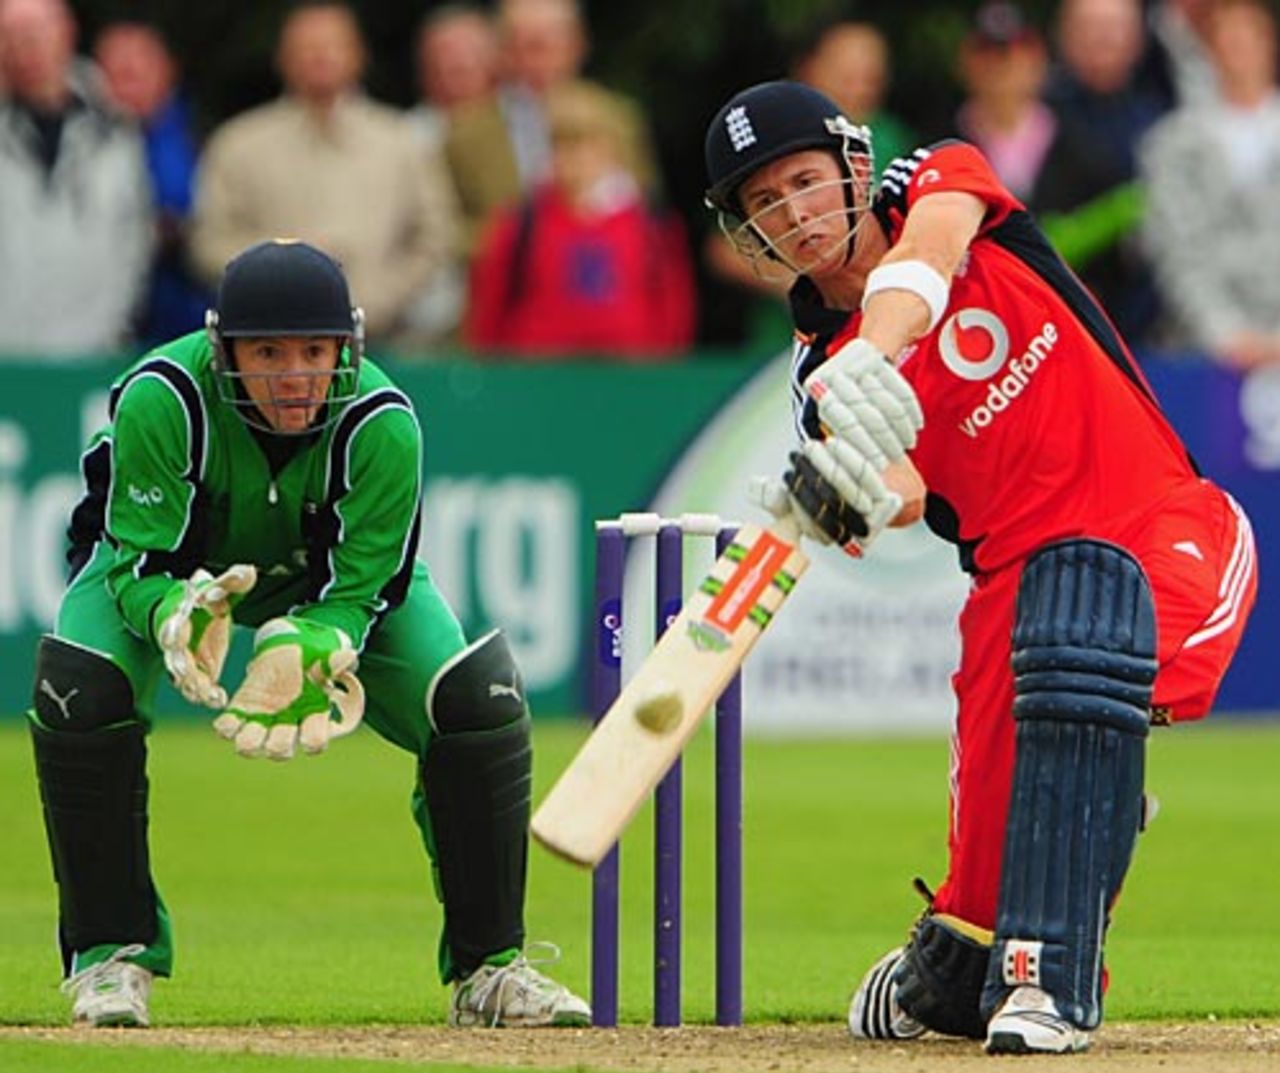 Joe Denly top-scored for England with 67, Ireland v England, only ODI, Stormont, August 27, 2009